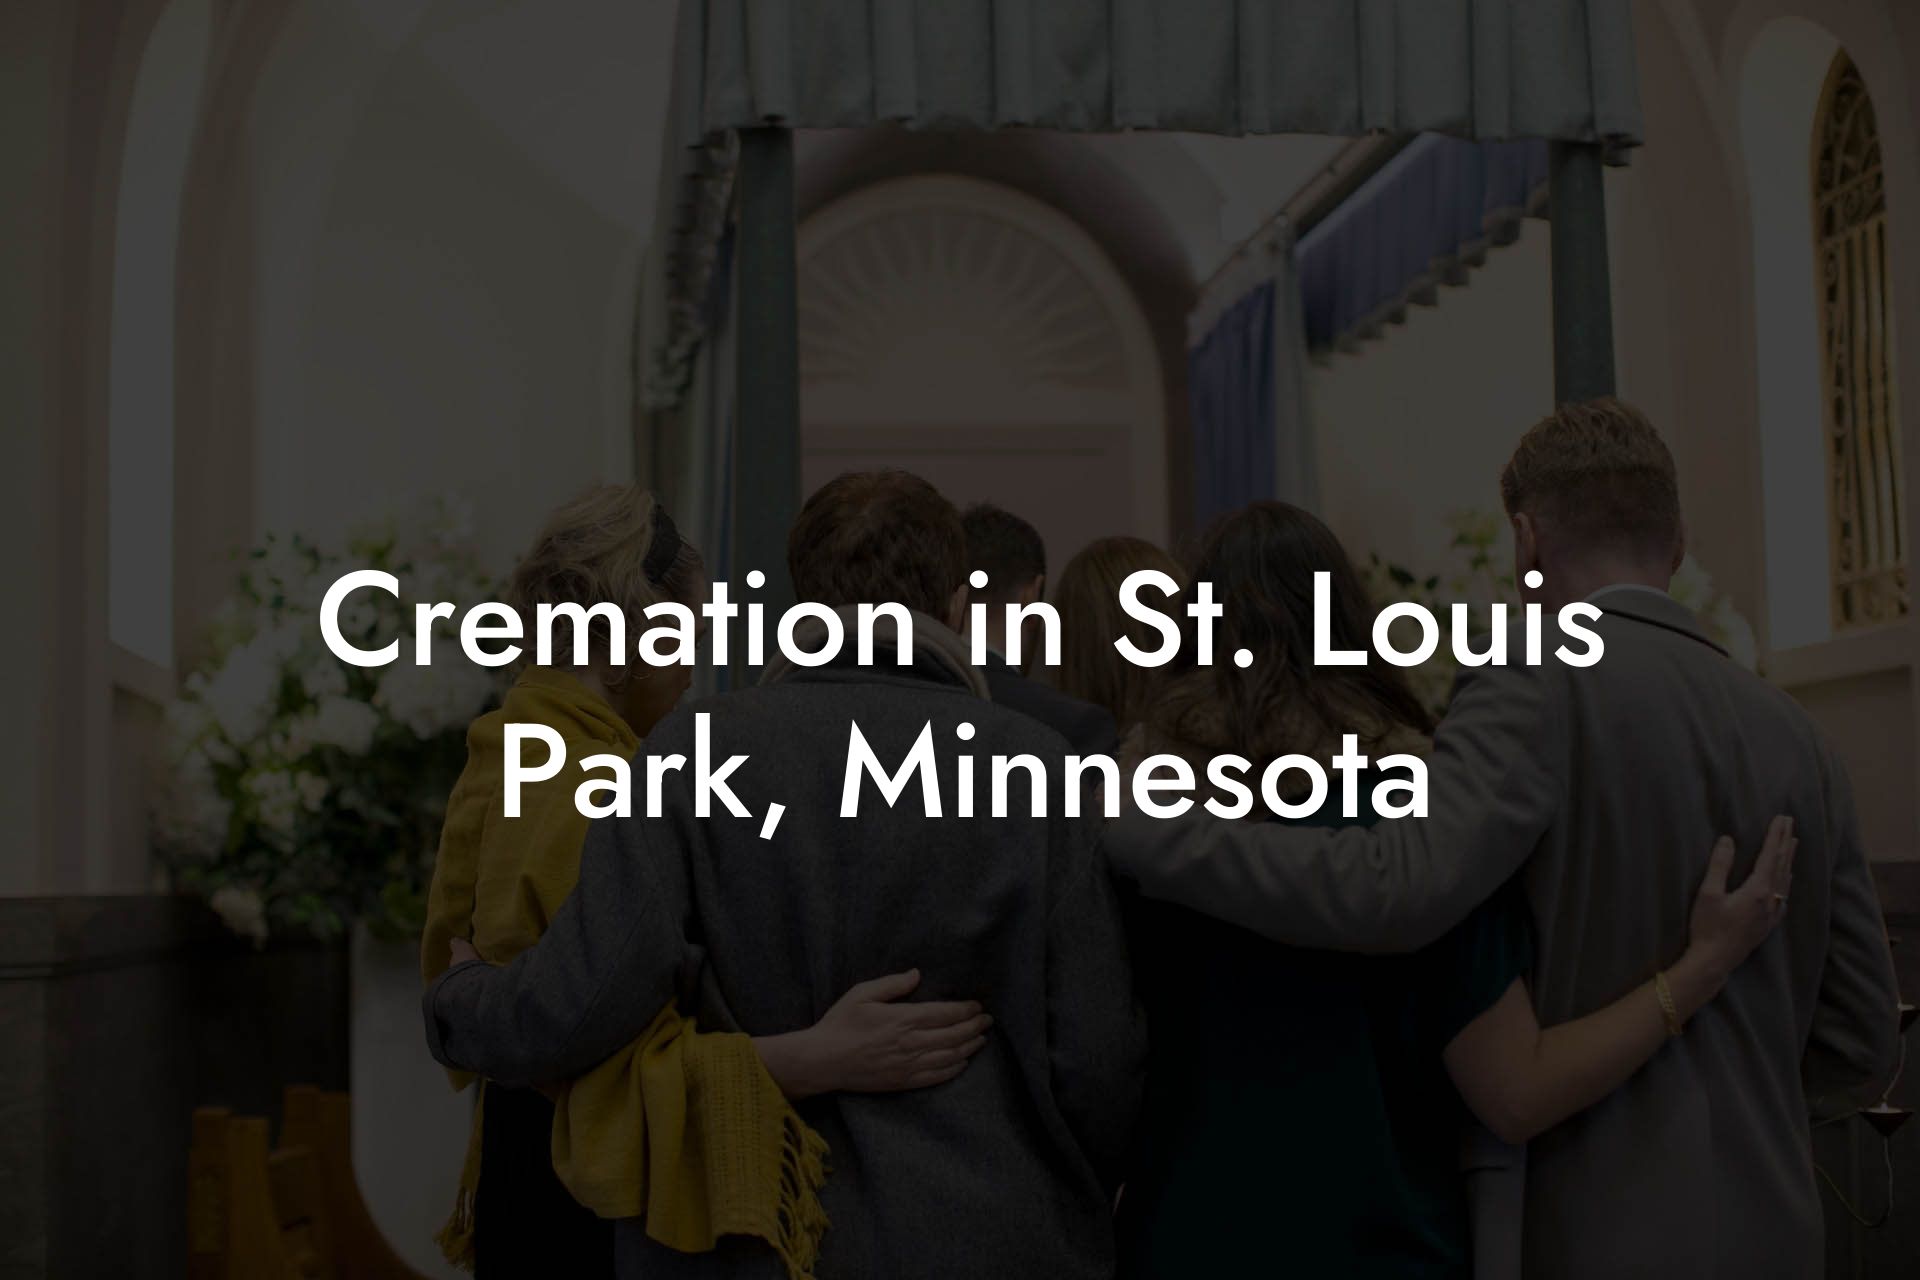 Cremation in St. Louis Park, Minnesota